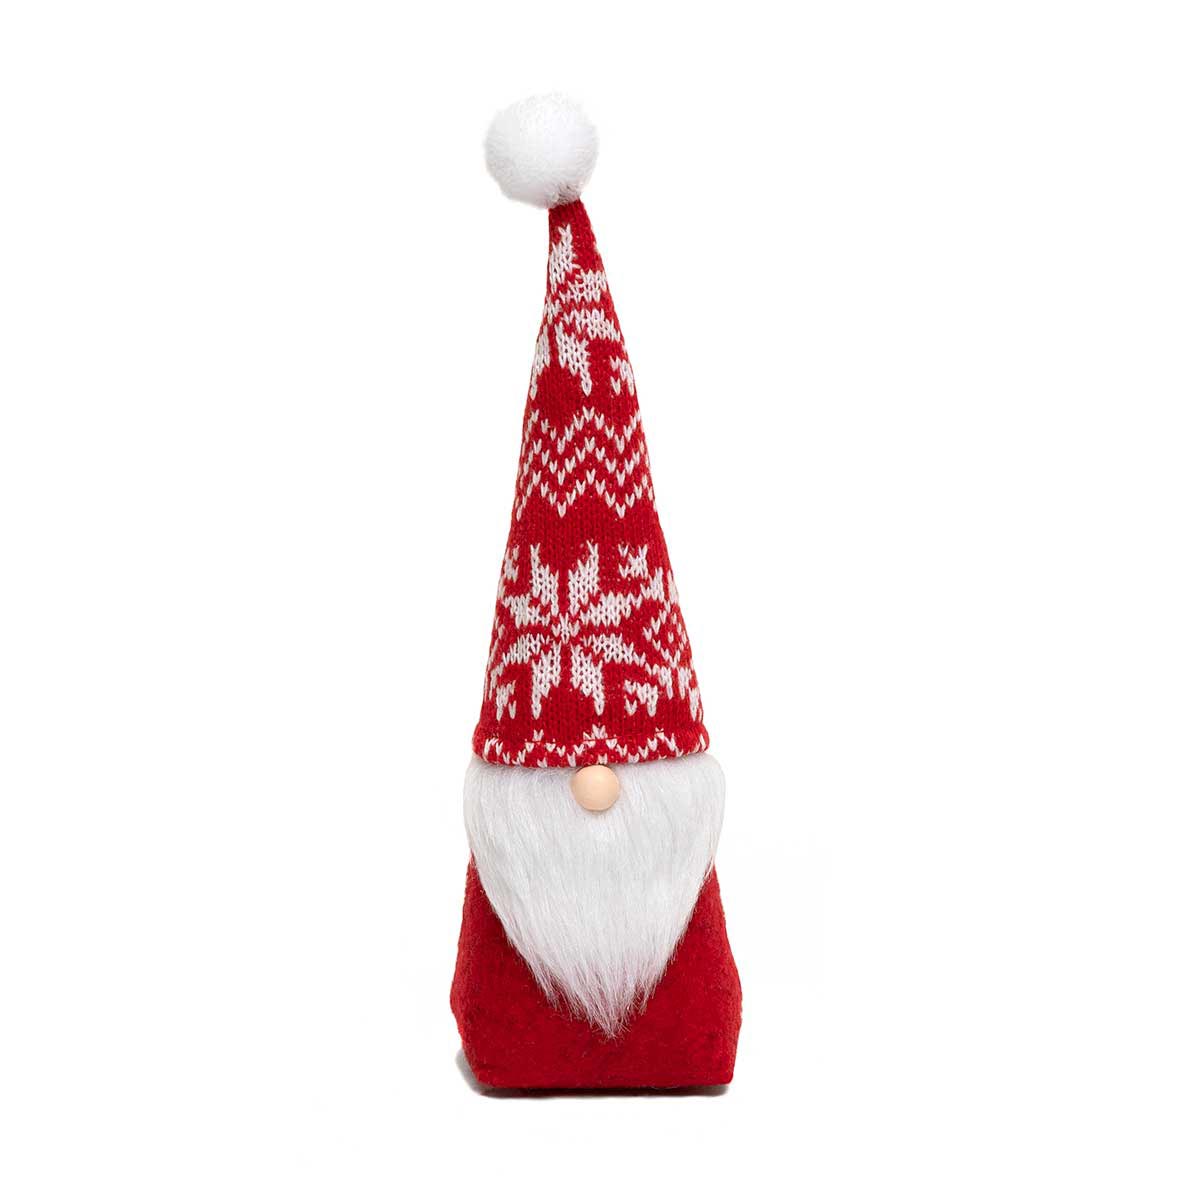 TOMTE HOLIDAY GNOME WITH SWEATER HAT MEDIUM